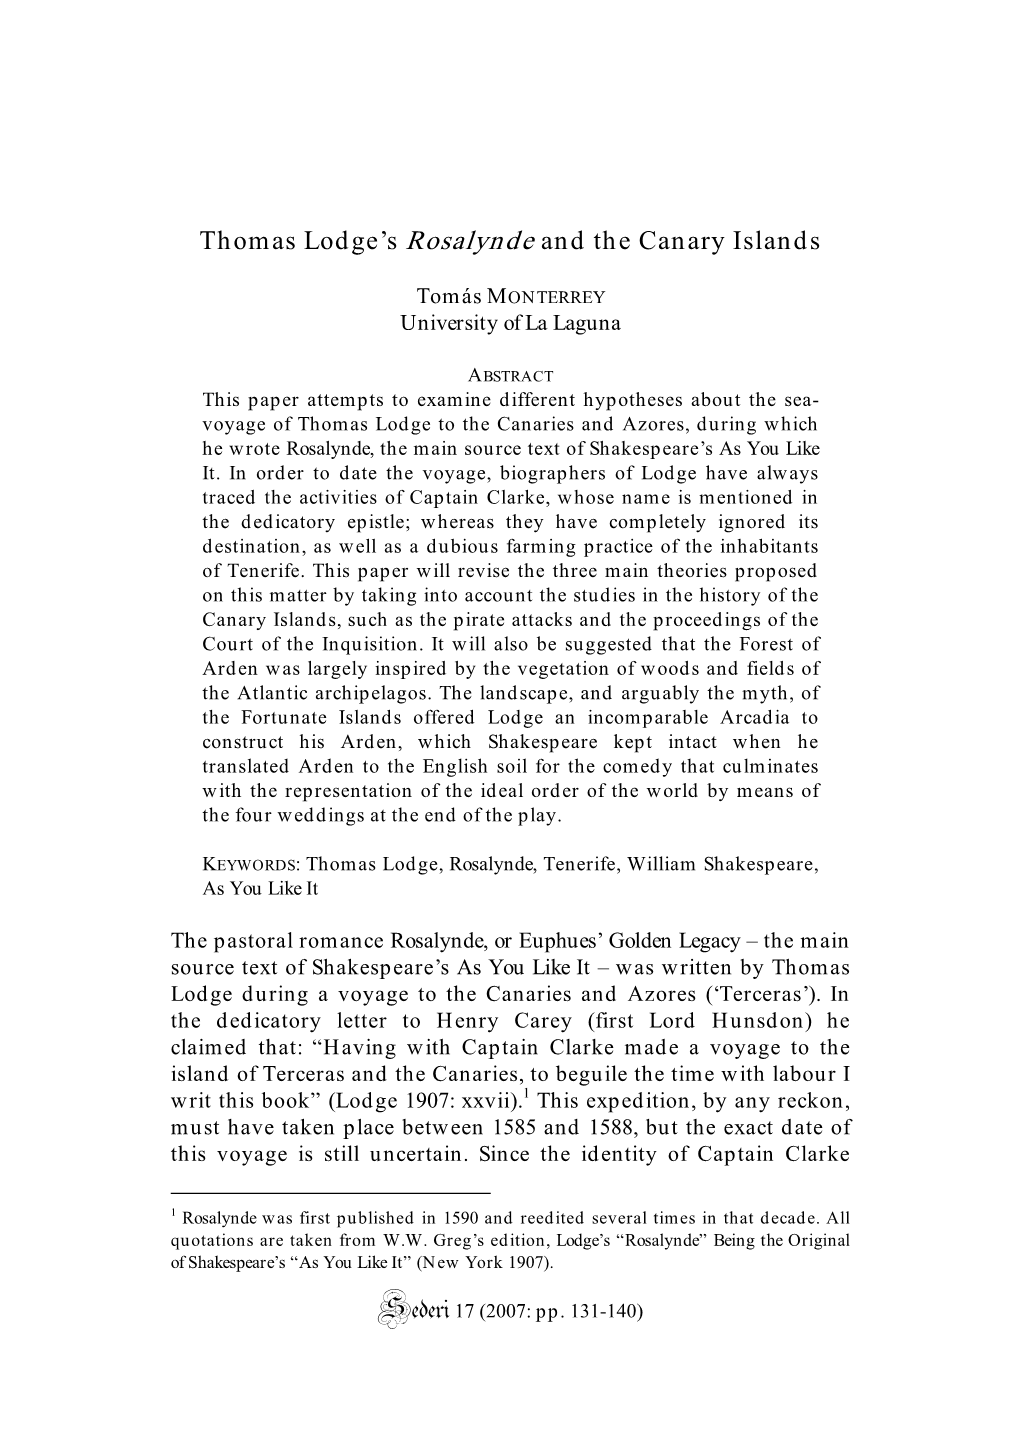 Thomas Lodge's Rosalynde and the Canary Islands